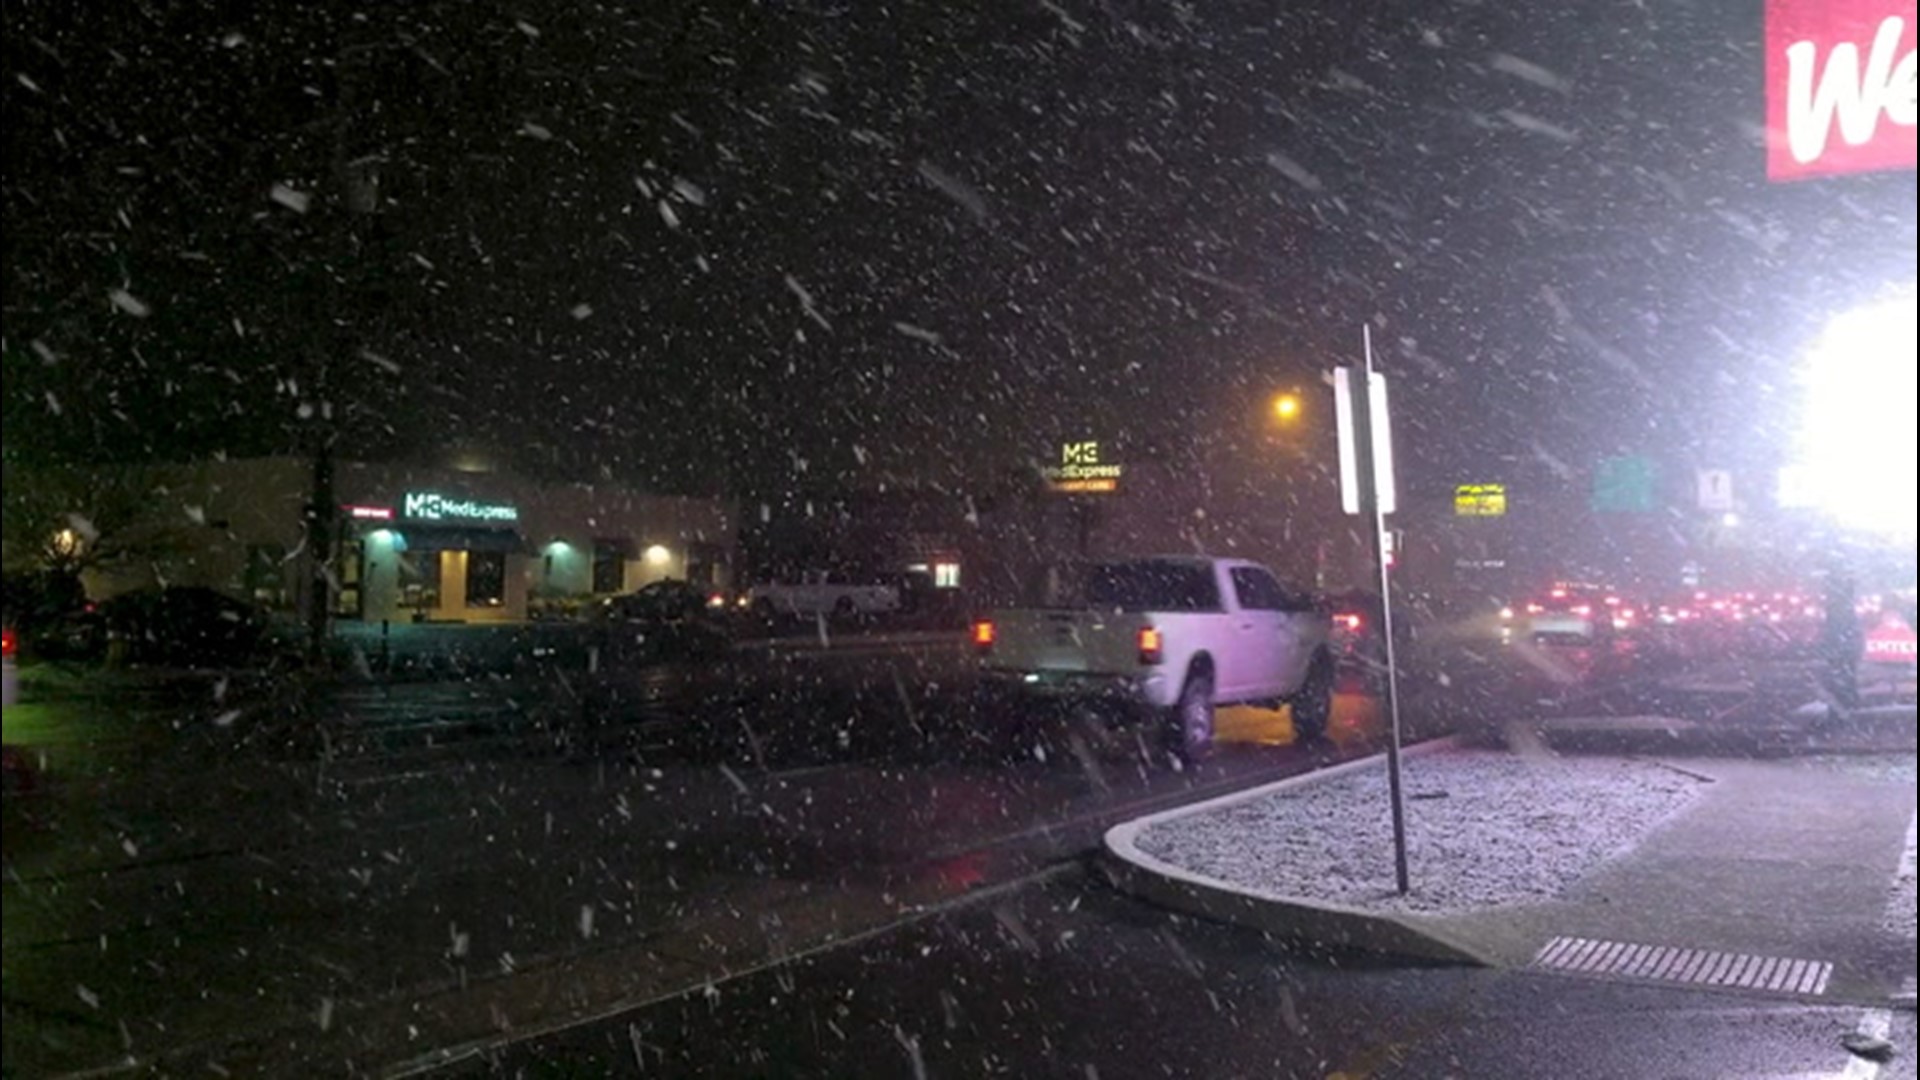 Large snowflakes covered Altoona, Pennsylvania, on Feb. 27 leaving a layer of white over the grass and streets.